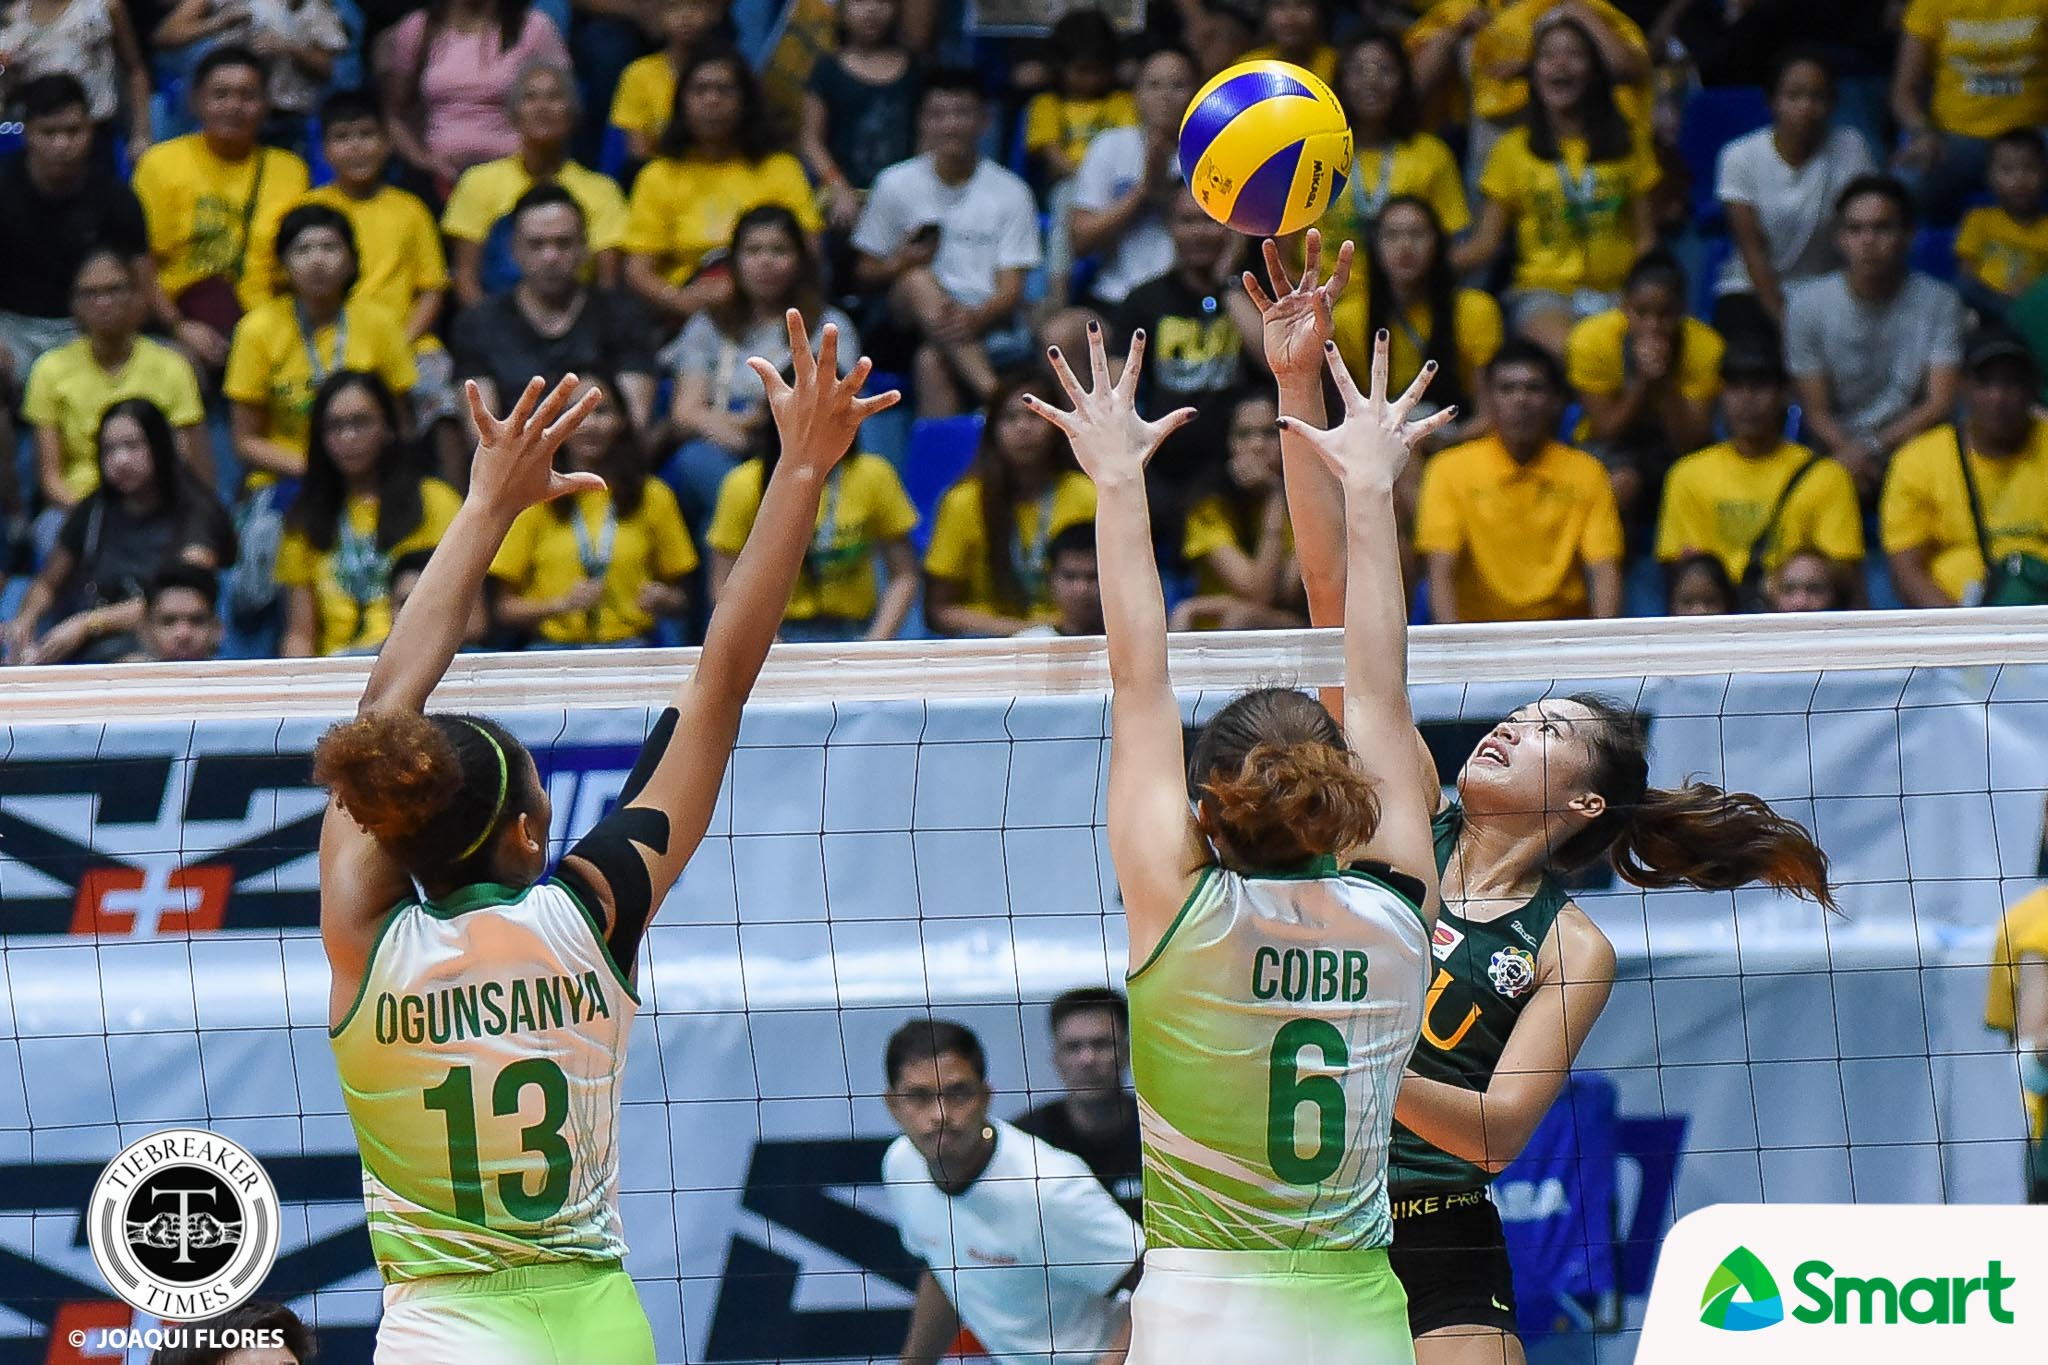 UAAP-80-Volleyball-DLSU-vs.-FEU-Pons-7127 Lack of experience cost Lady Tamaraws against Lady Spikers FEU News UAAP Volleyball  - philippine sports news